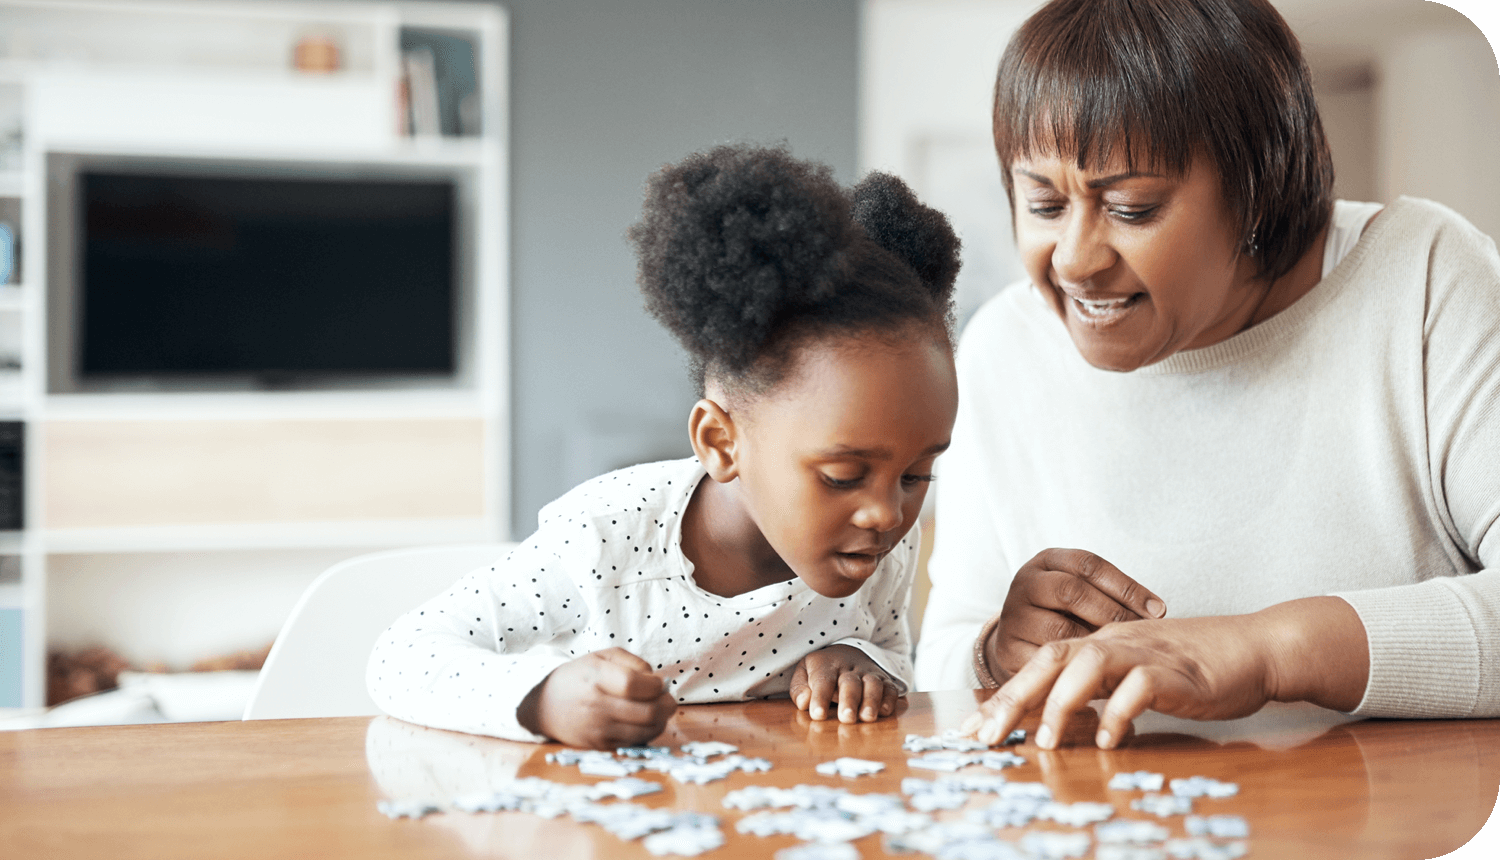 Image of a woman and child putting together a jigsaw puzzle